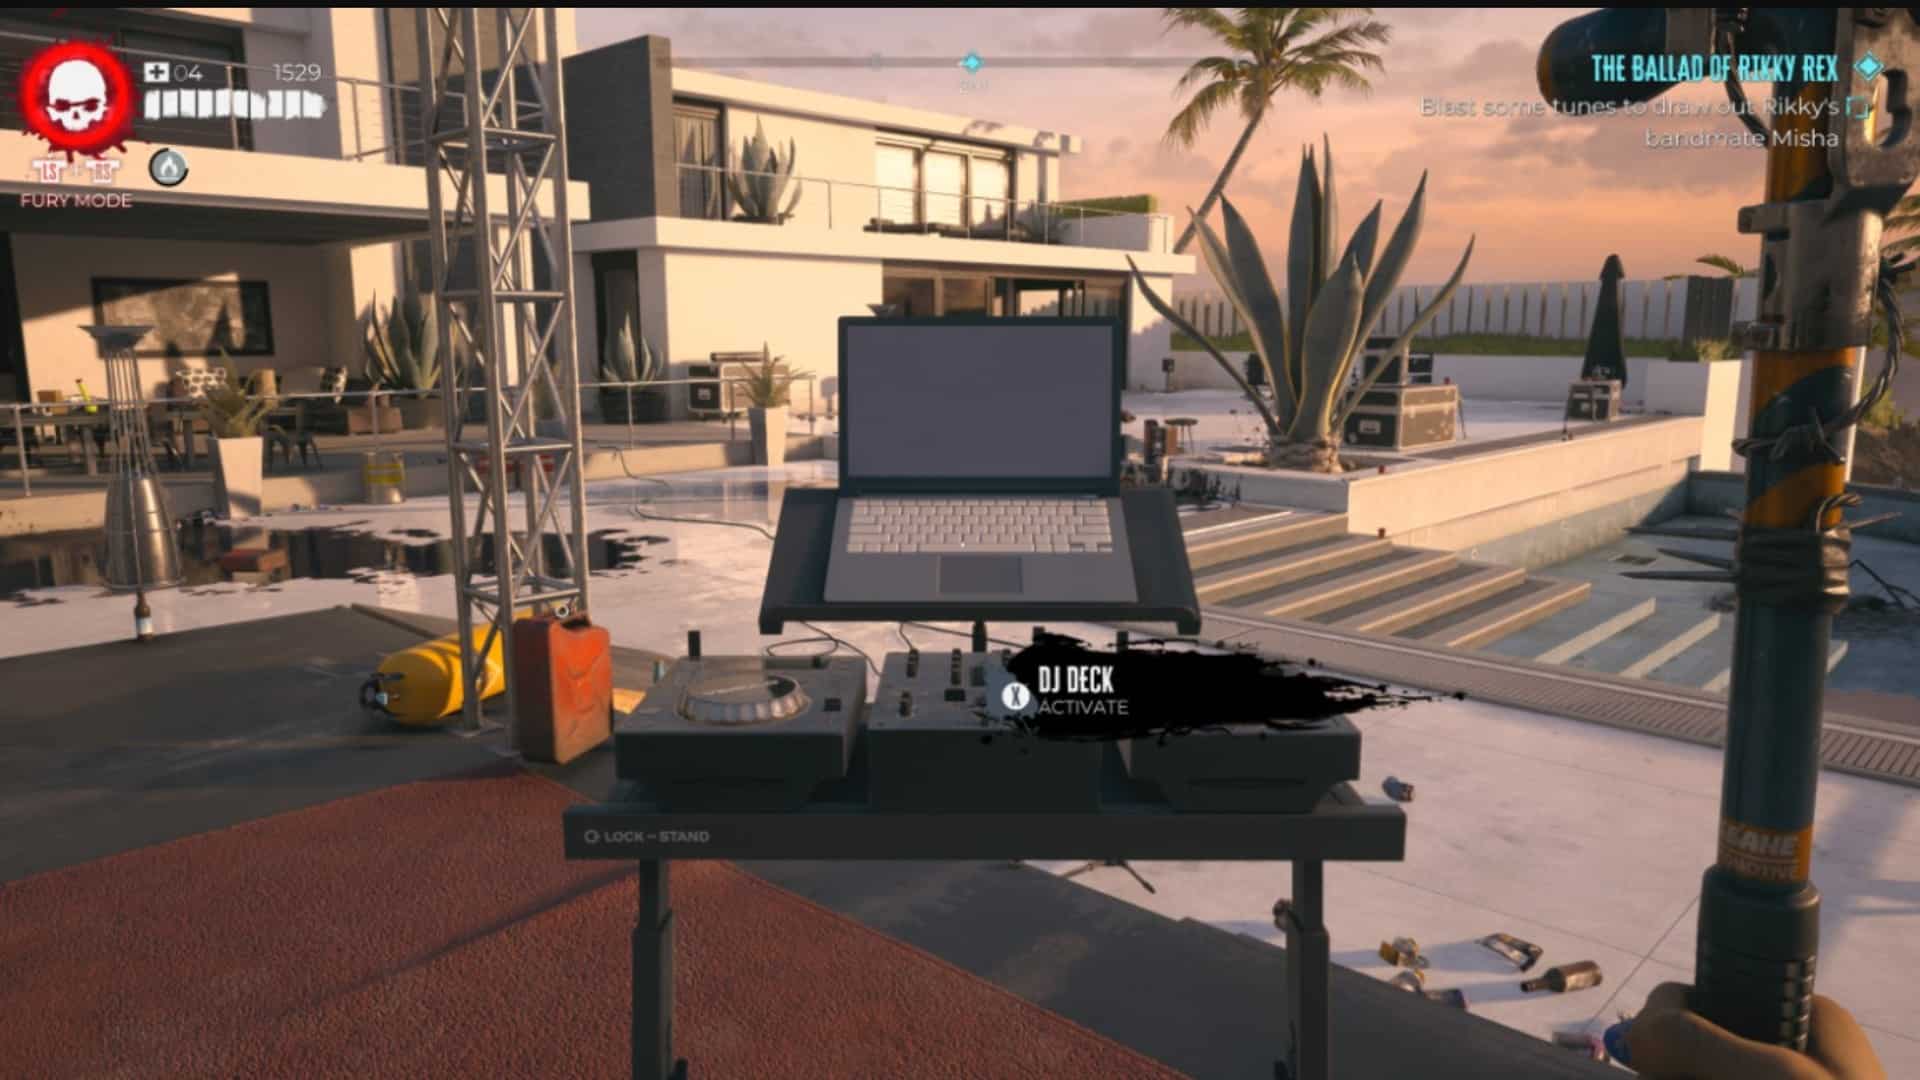 Music System by the Pool in Dead Island 2